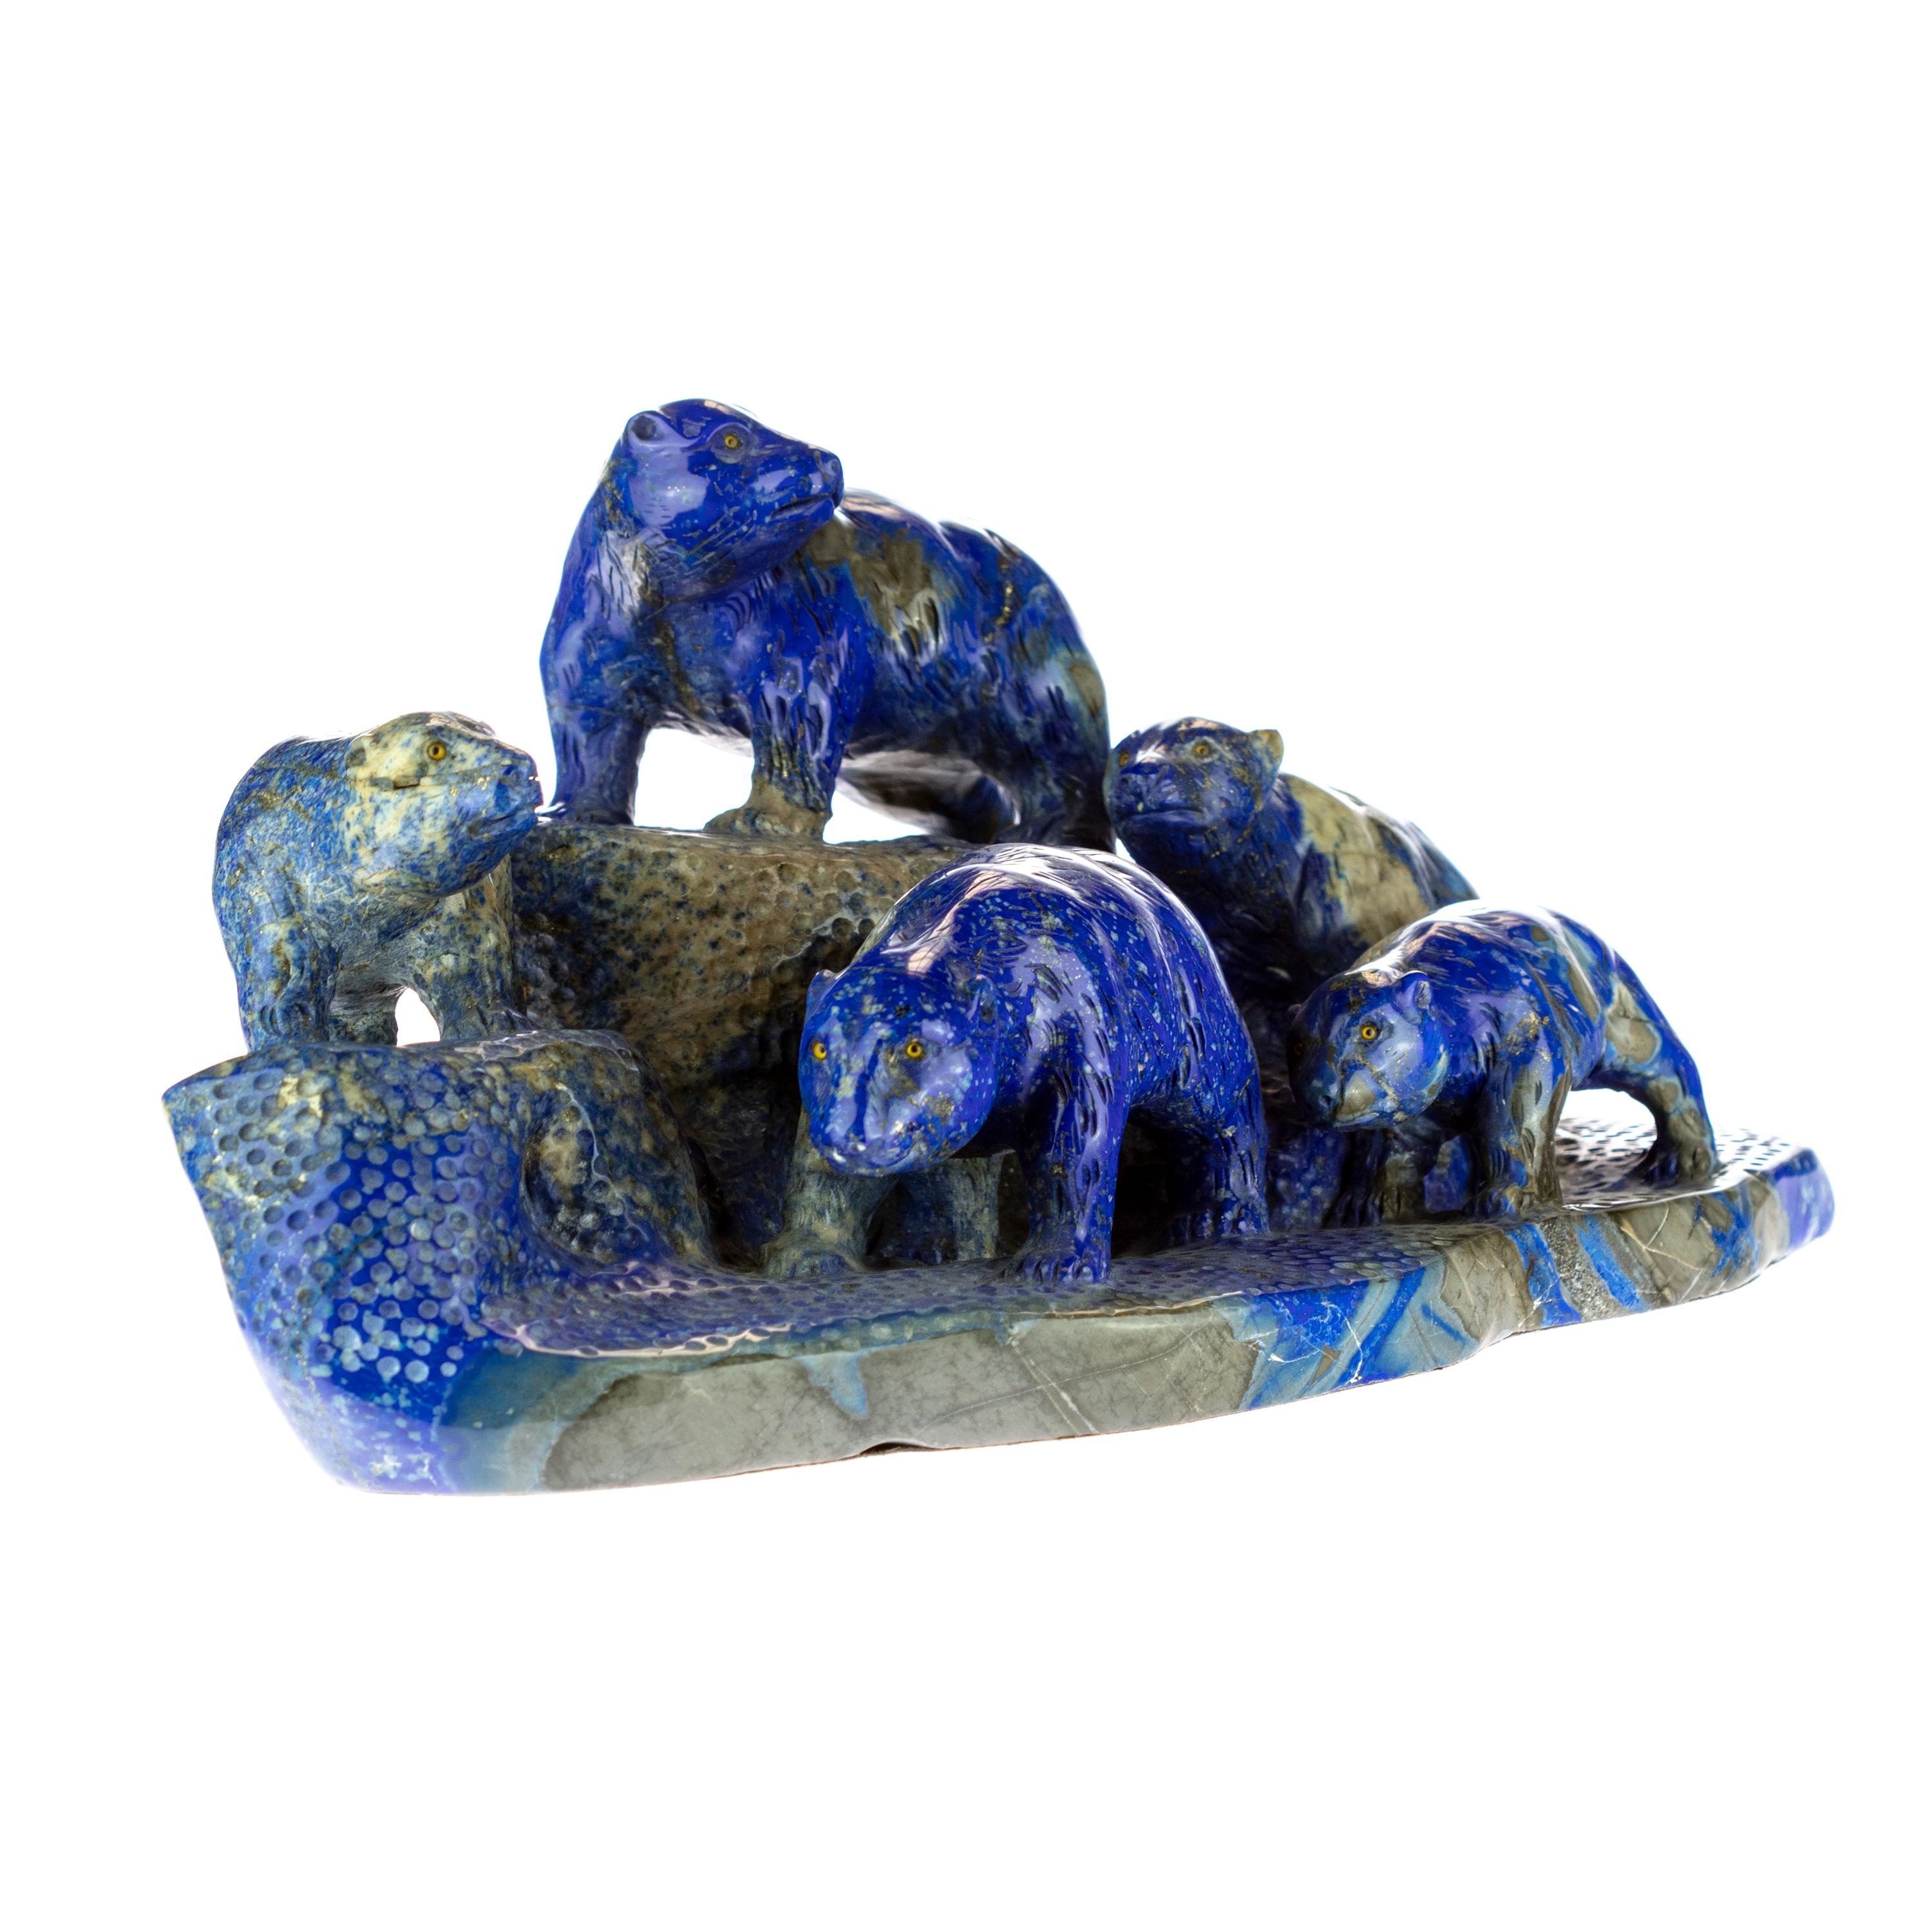 Chinese Export Lapis Lazuli Blue Bears Family Carved Animal Artisanal Eastern Statue Sculpture For Sale